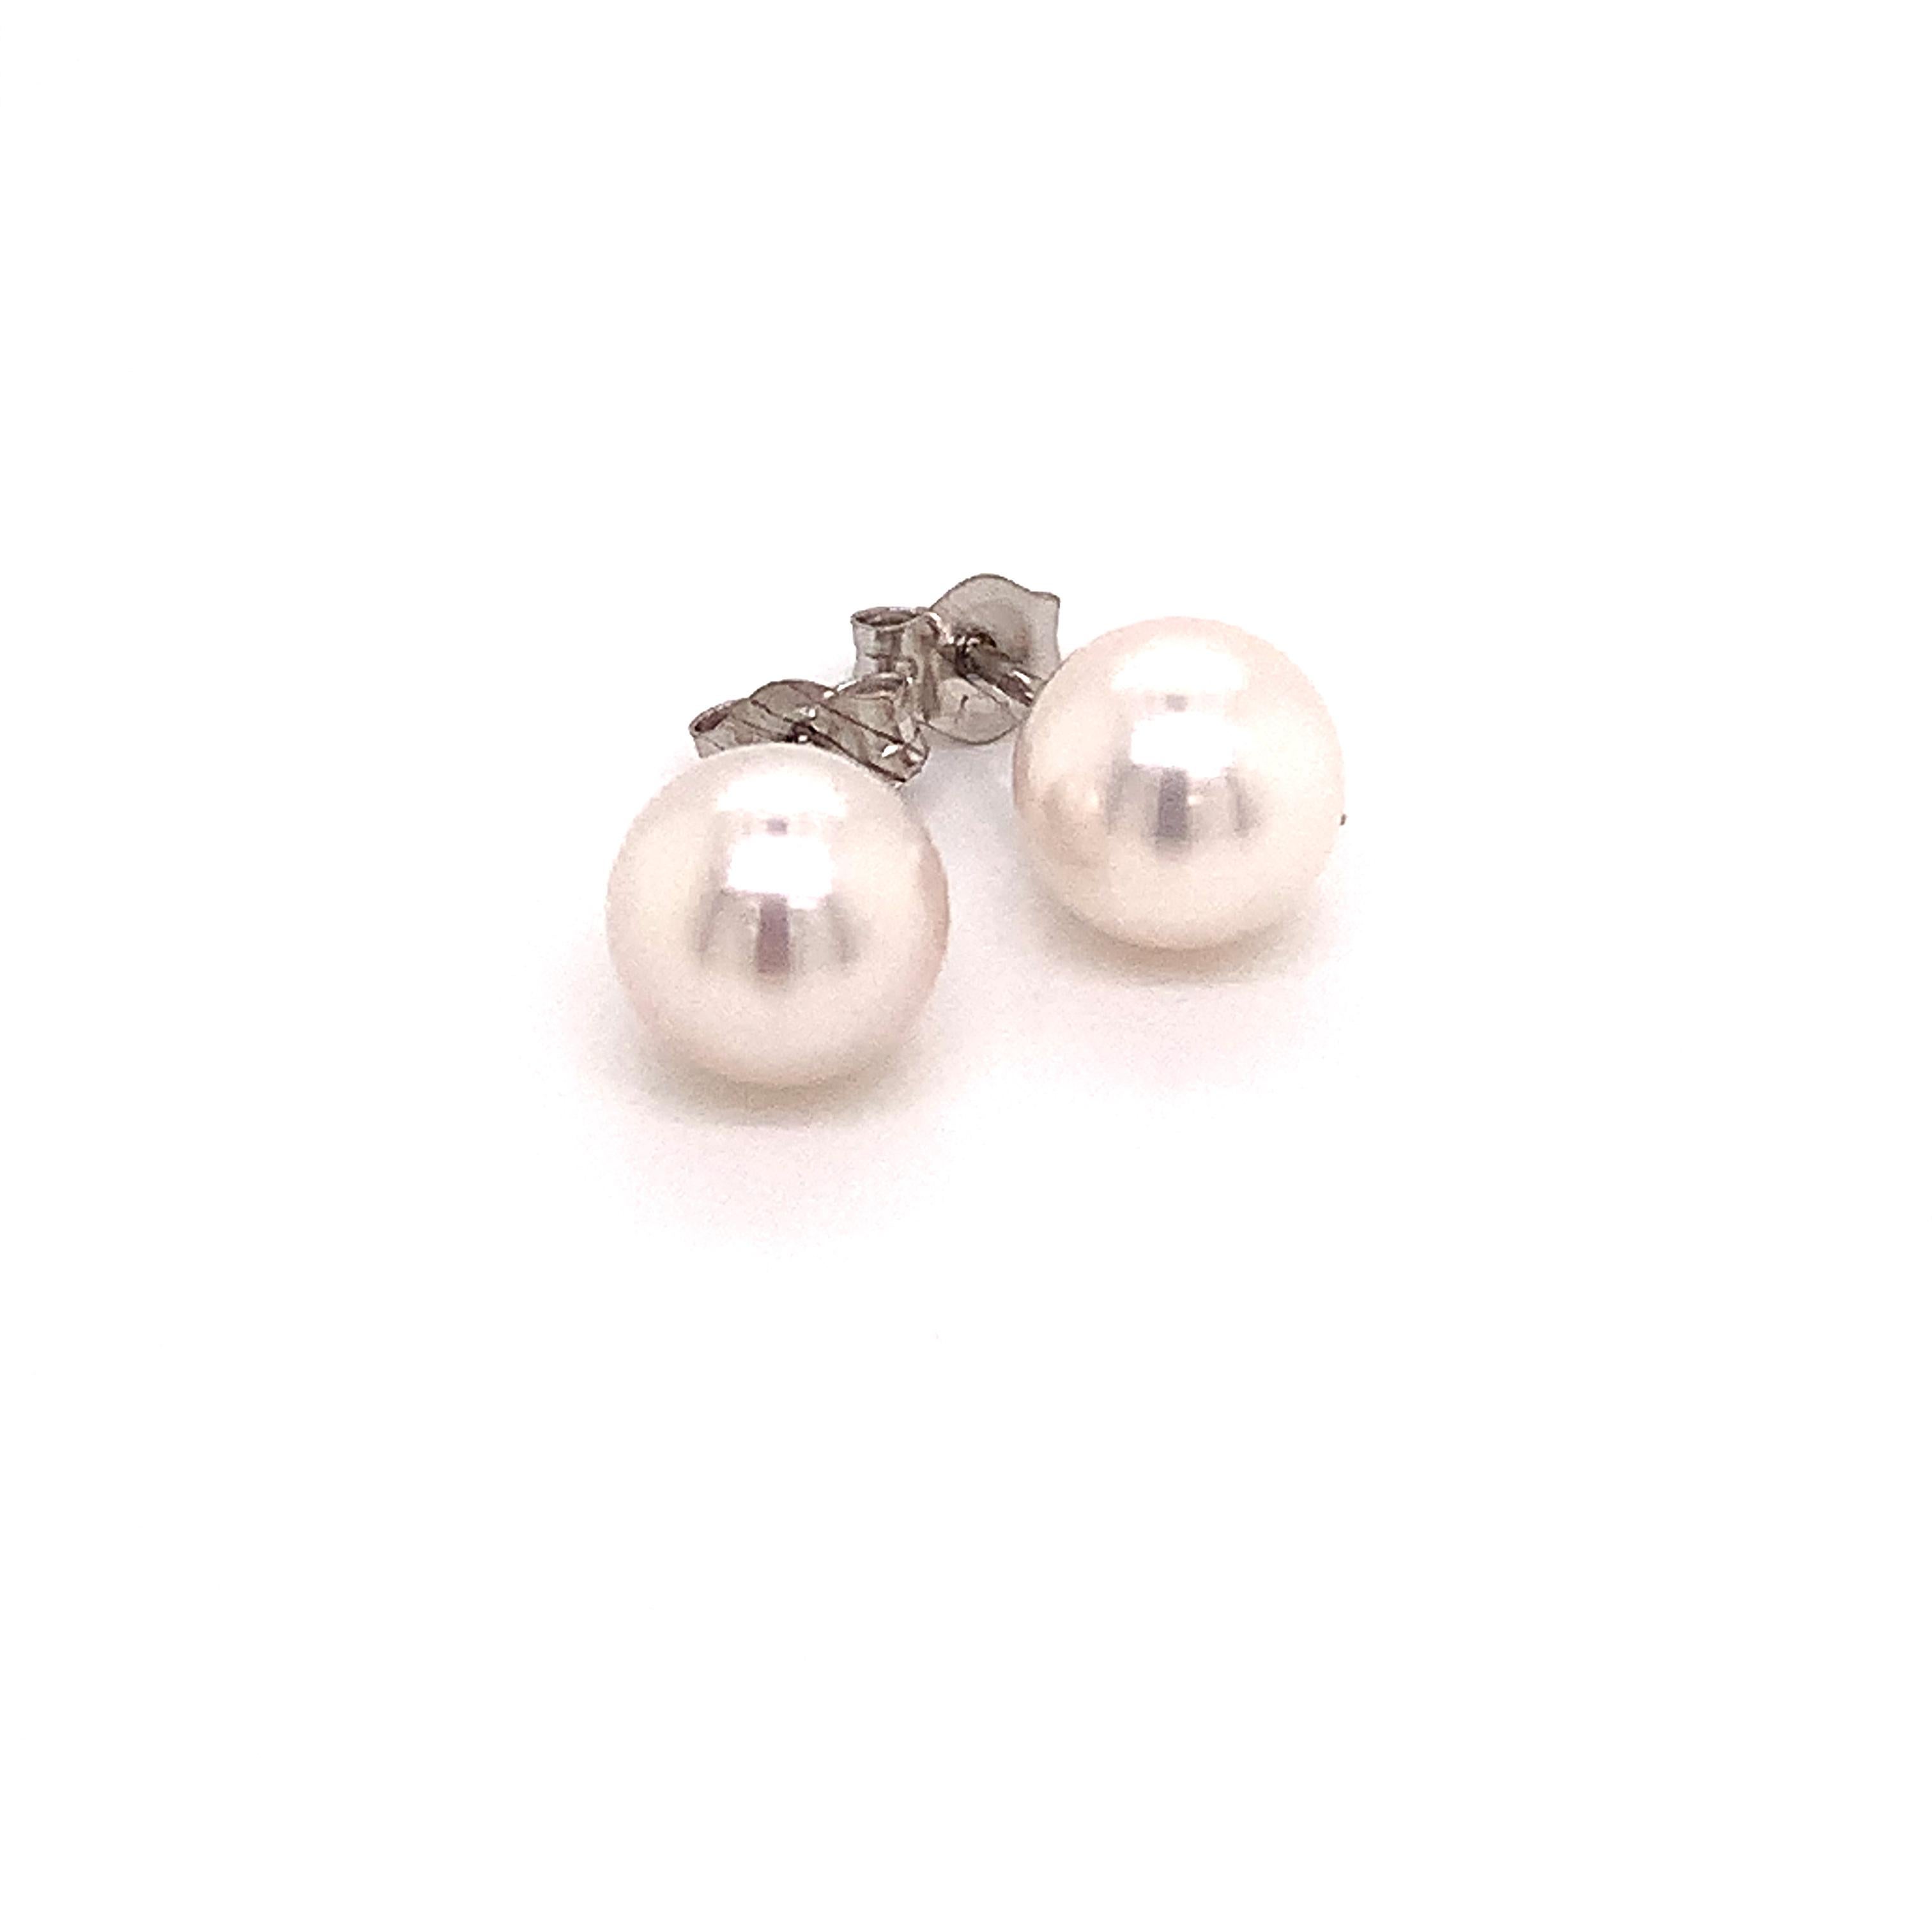 
Akoya Pearl Stud Earrings 14k White Gold 6.95 mm Certified $599 015867

If a video of this item is not available in this listing please request a link through the message center and we will be more than happy to send you a link.

This is a One of a